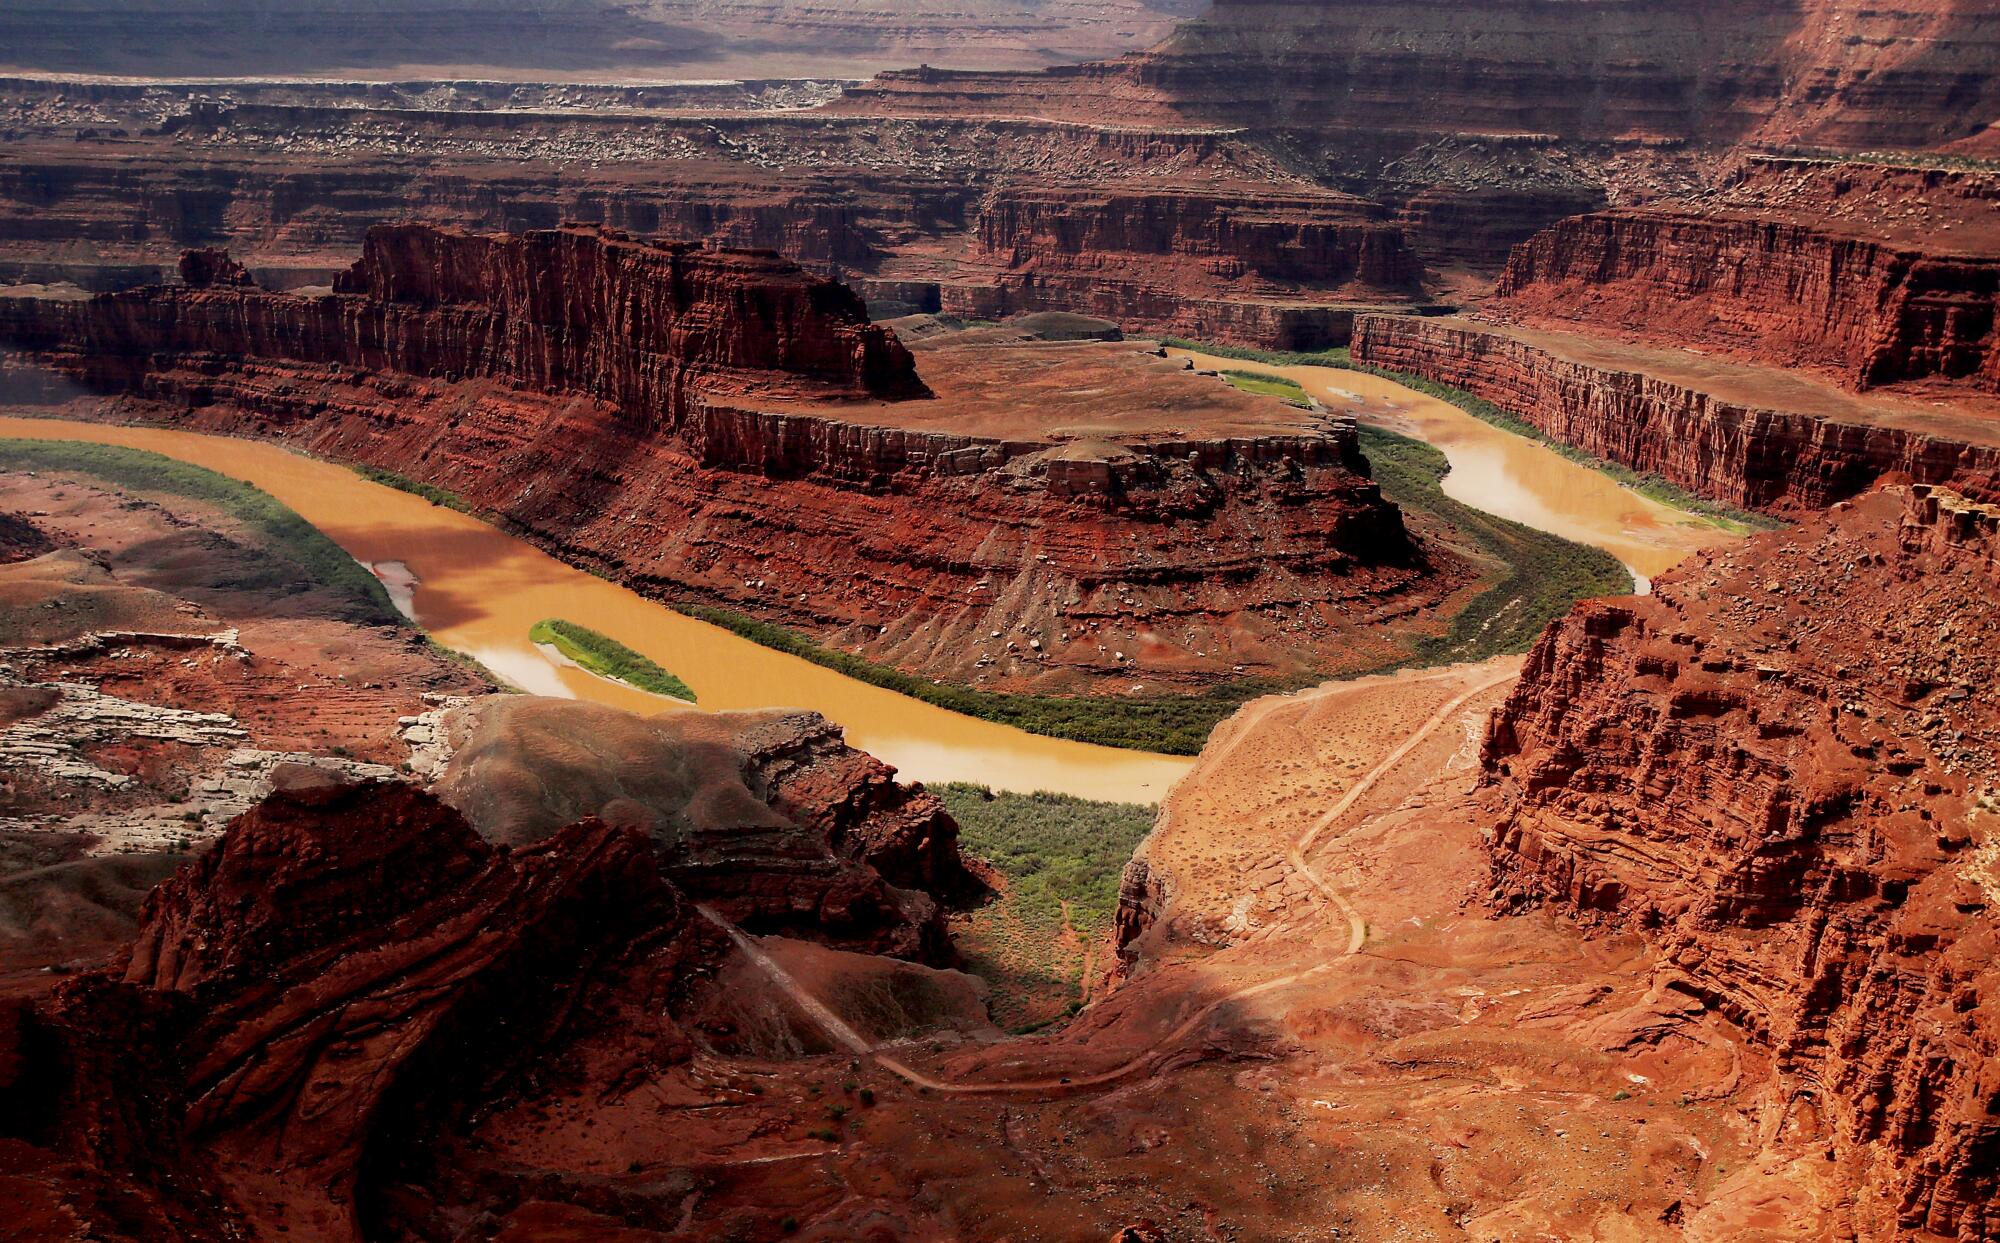 The muddy waters of the Colorado River course around Canyonlands National Park as seen from Dead Horse Point near Moab